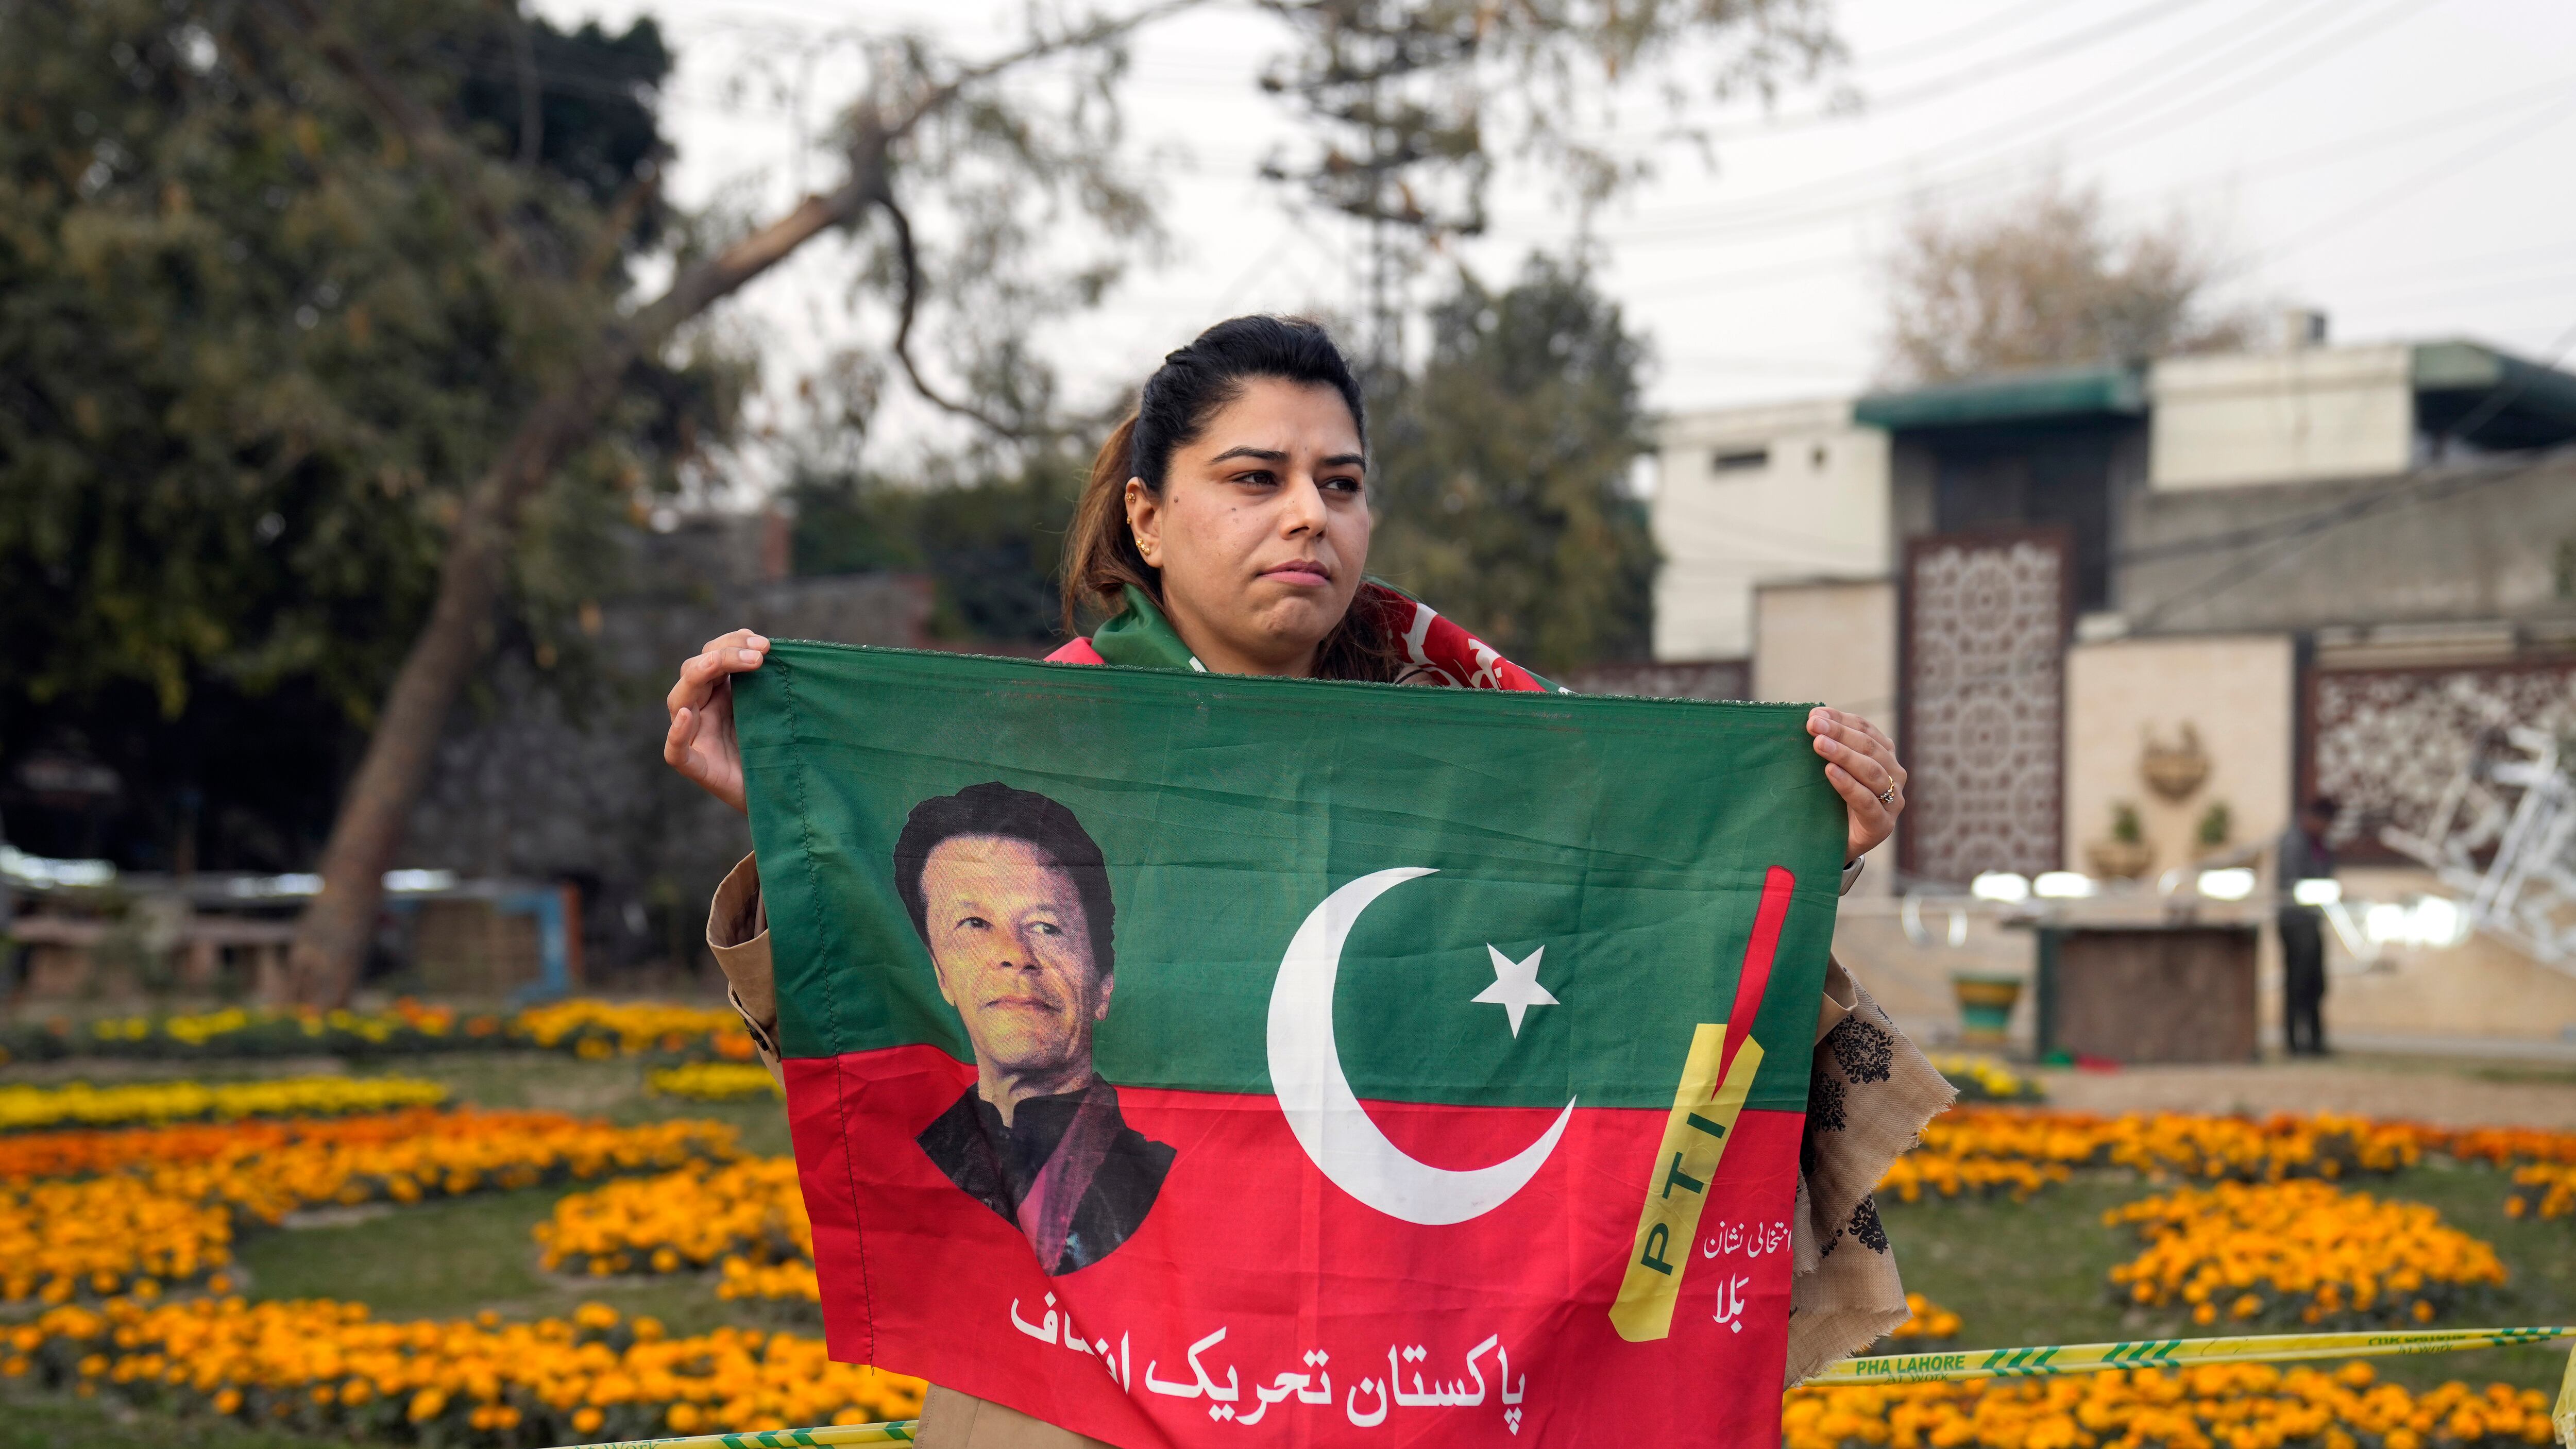 Imran Khan has been sentenced to 10 years in jail for revealing official secrets (AP Photo/K.M. Chaudary, File)